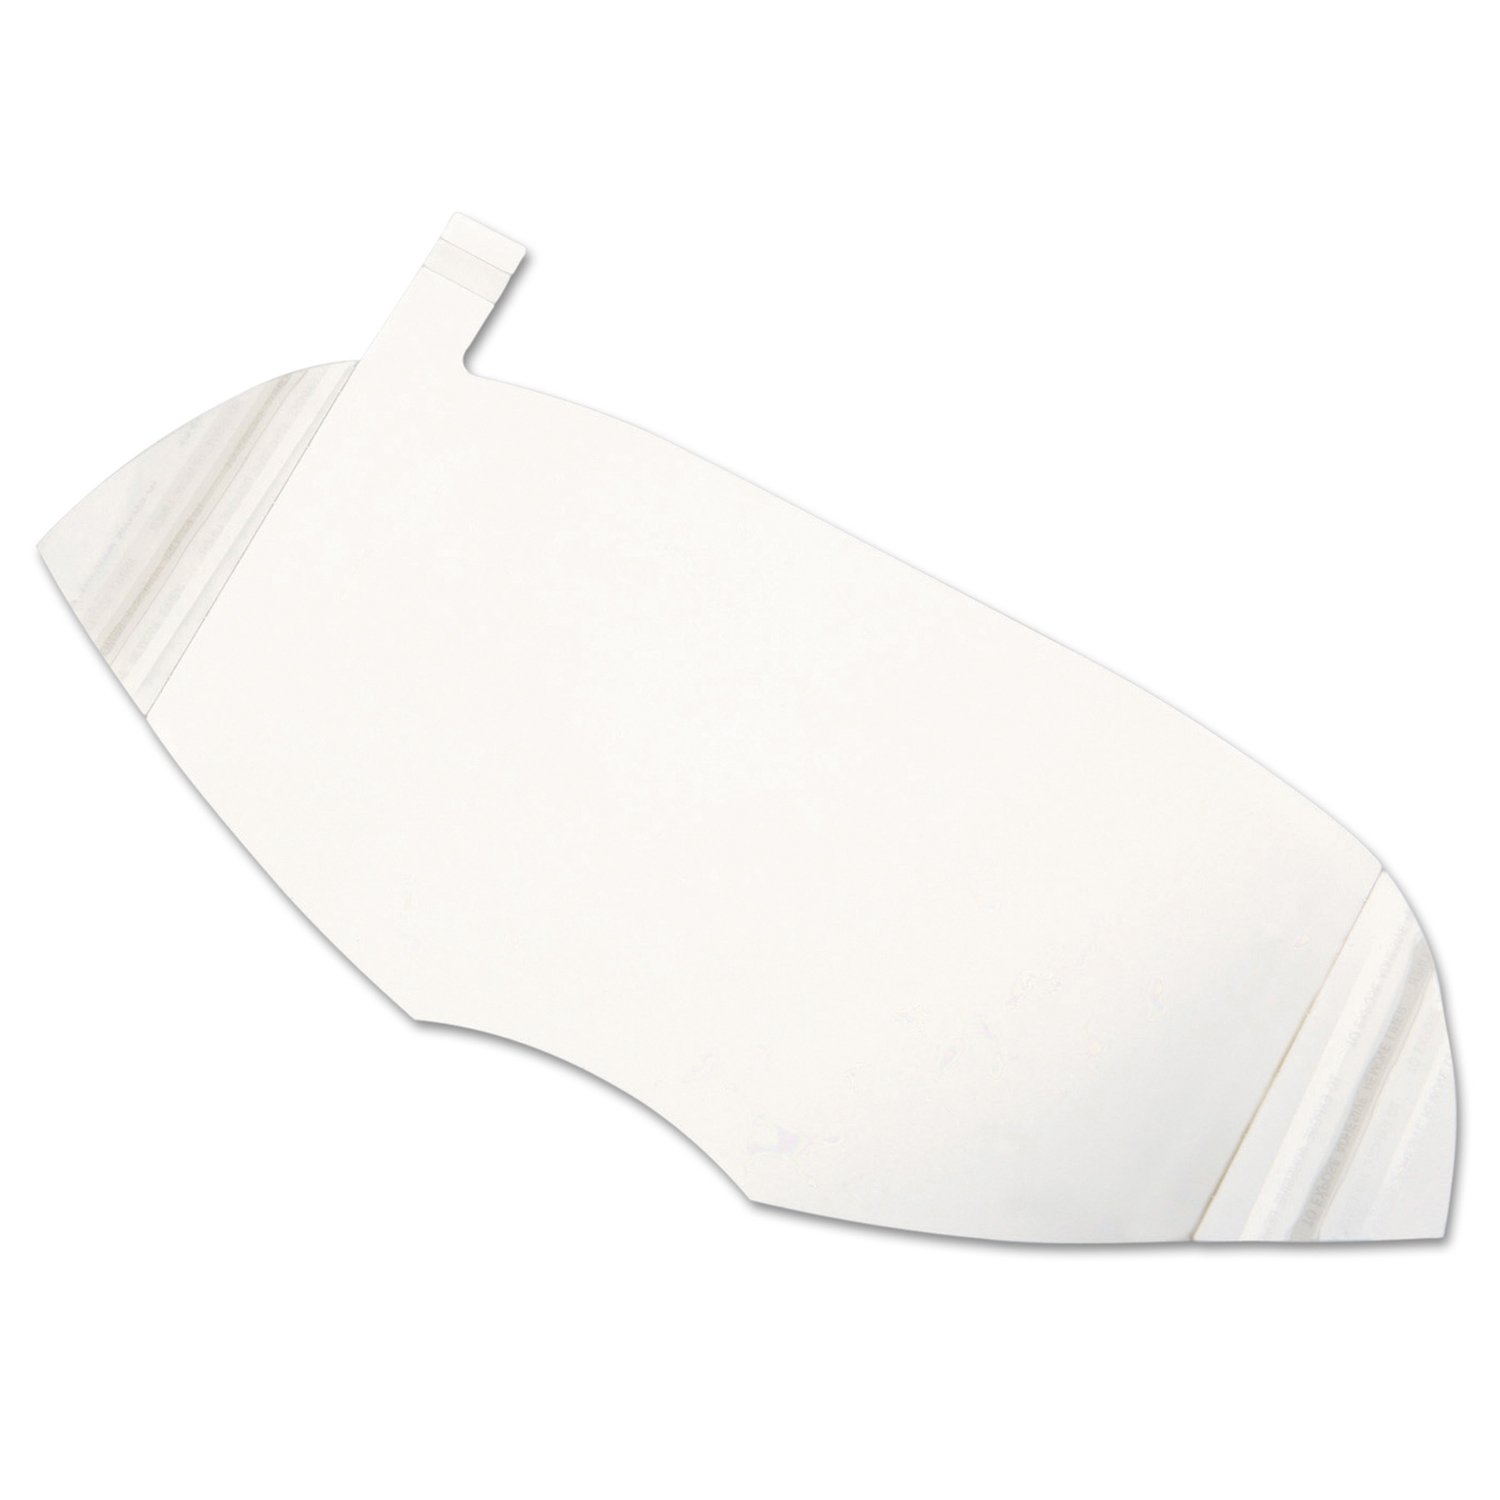 Honeywell North® Peel-Away Window for Full Face Respirators - Parts & Accessories